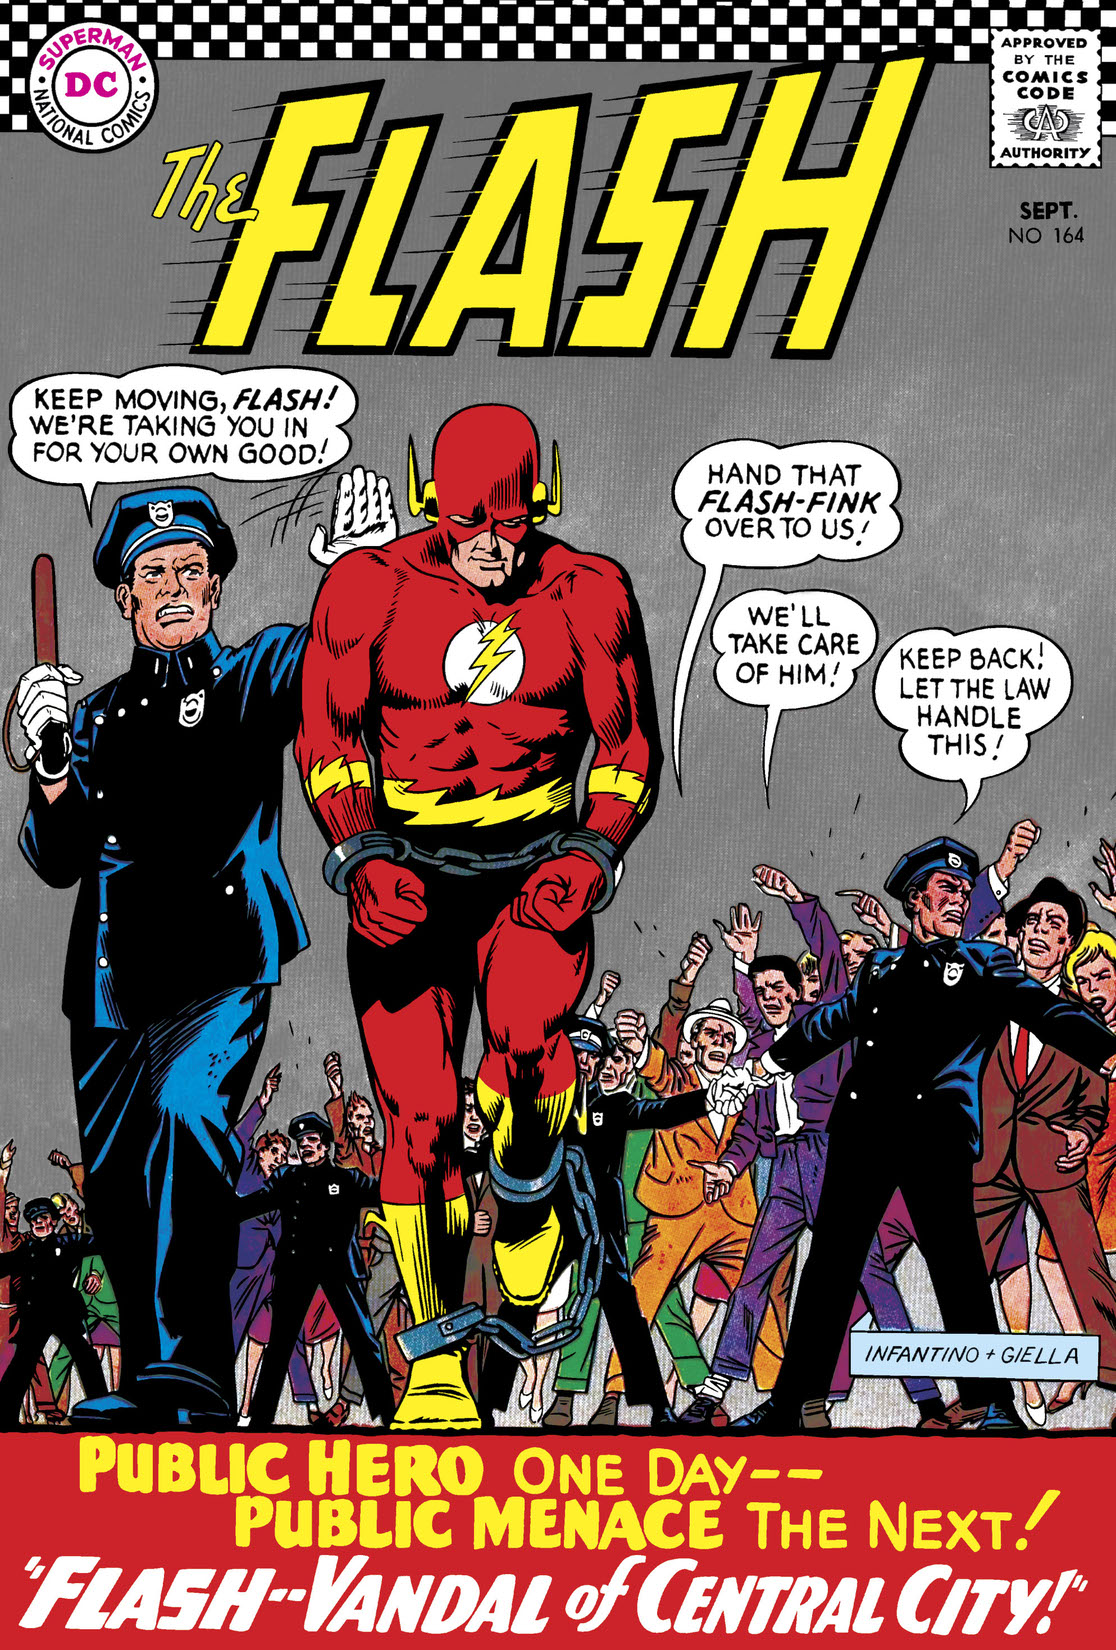 The Flash (1959-) #164 preview images